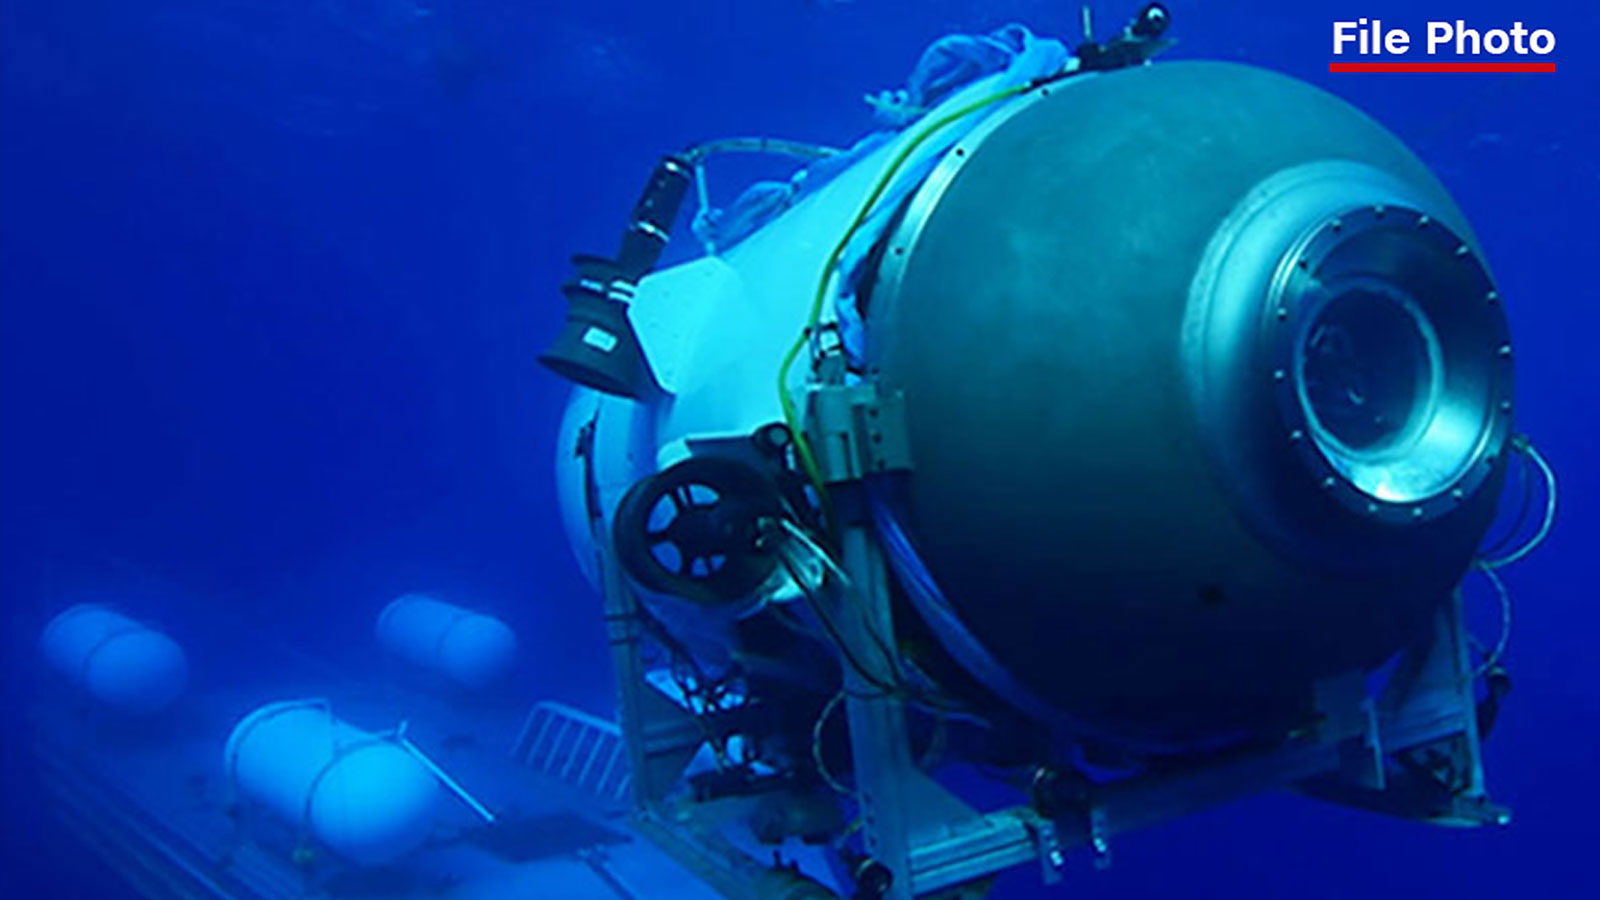 An undated photograph  of the OceanGate Titan submersible.